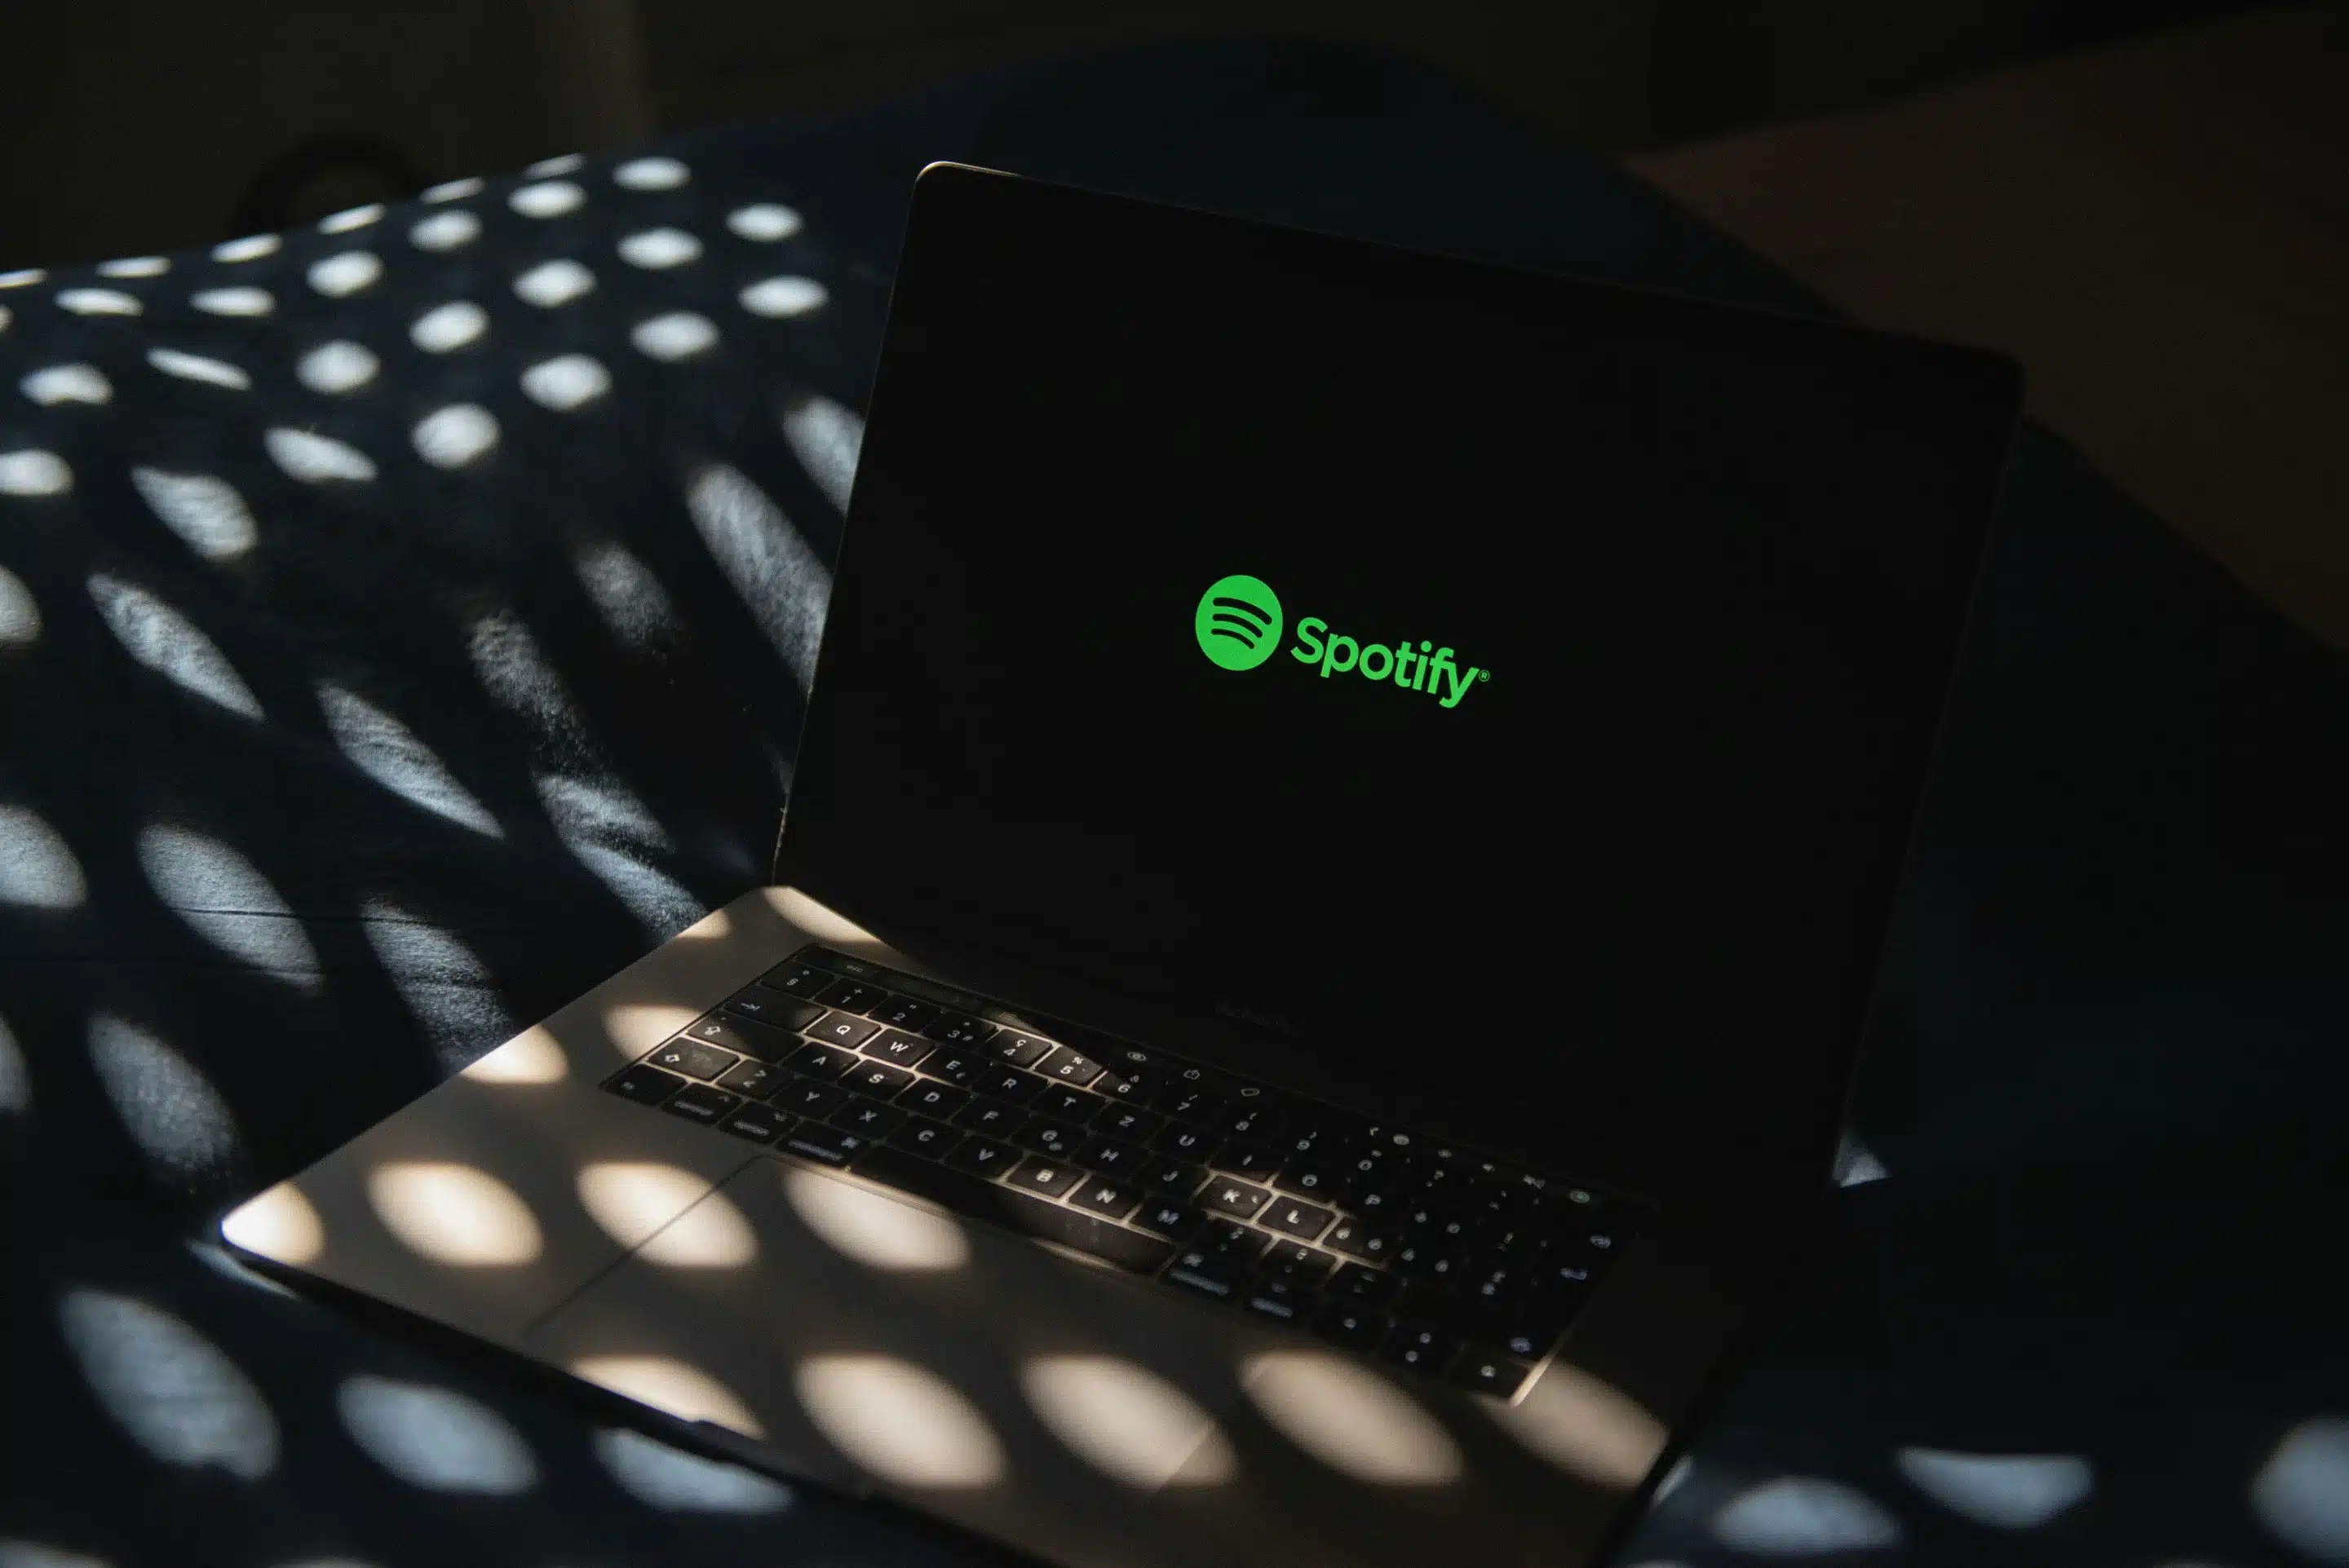 Spotify interface showcasing personalized playlists, powered by self-learning AI technology for enhanced music discovery.